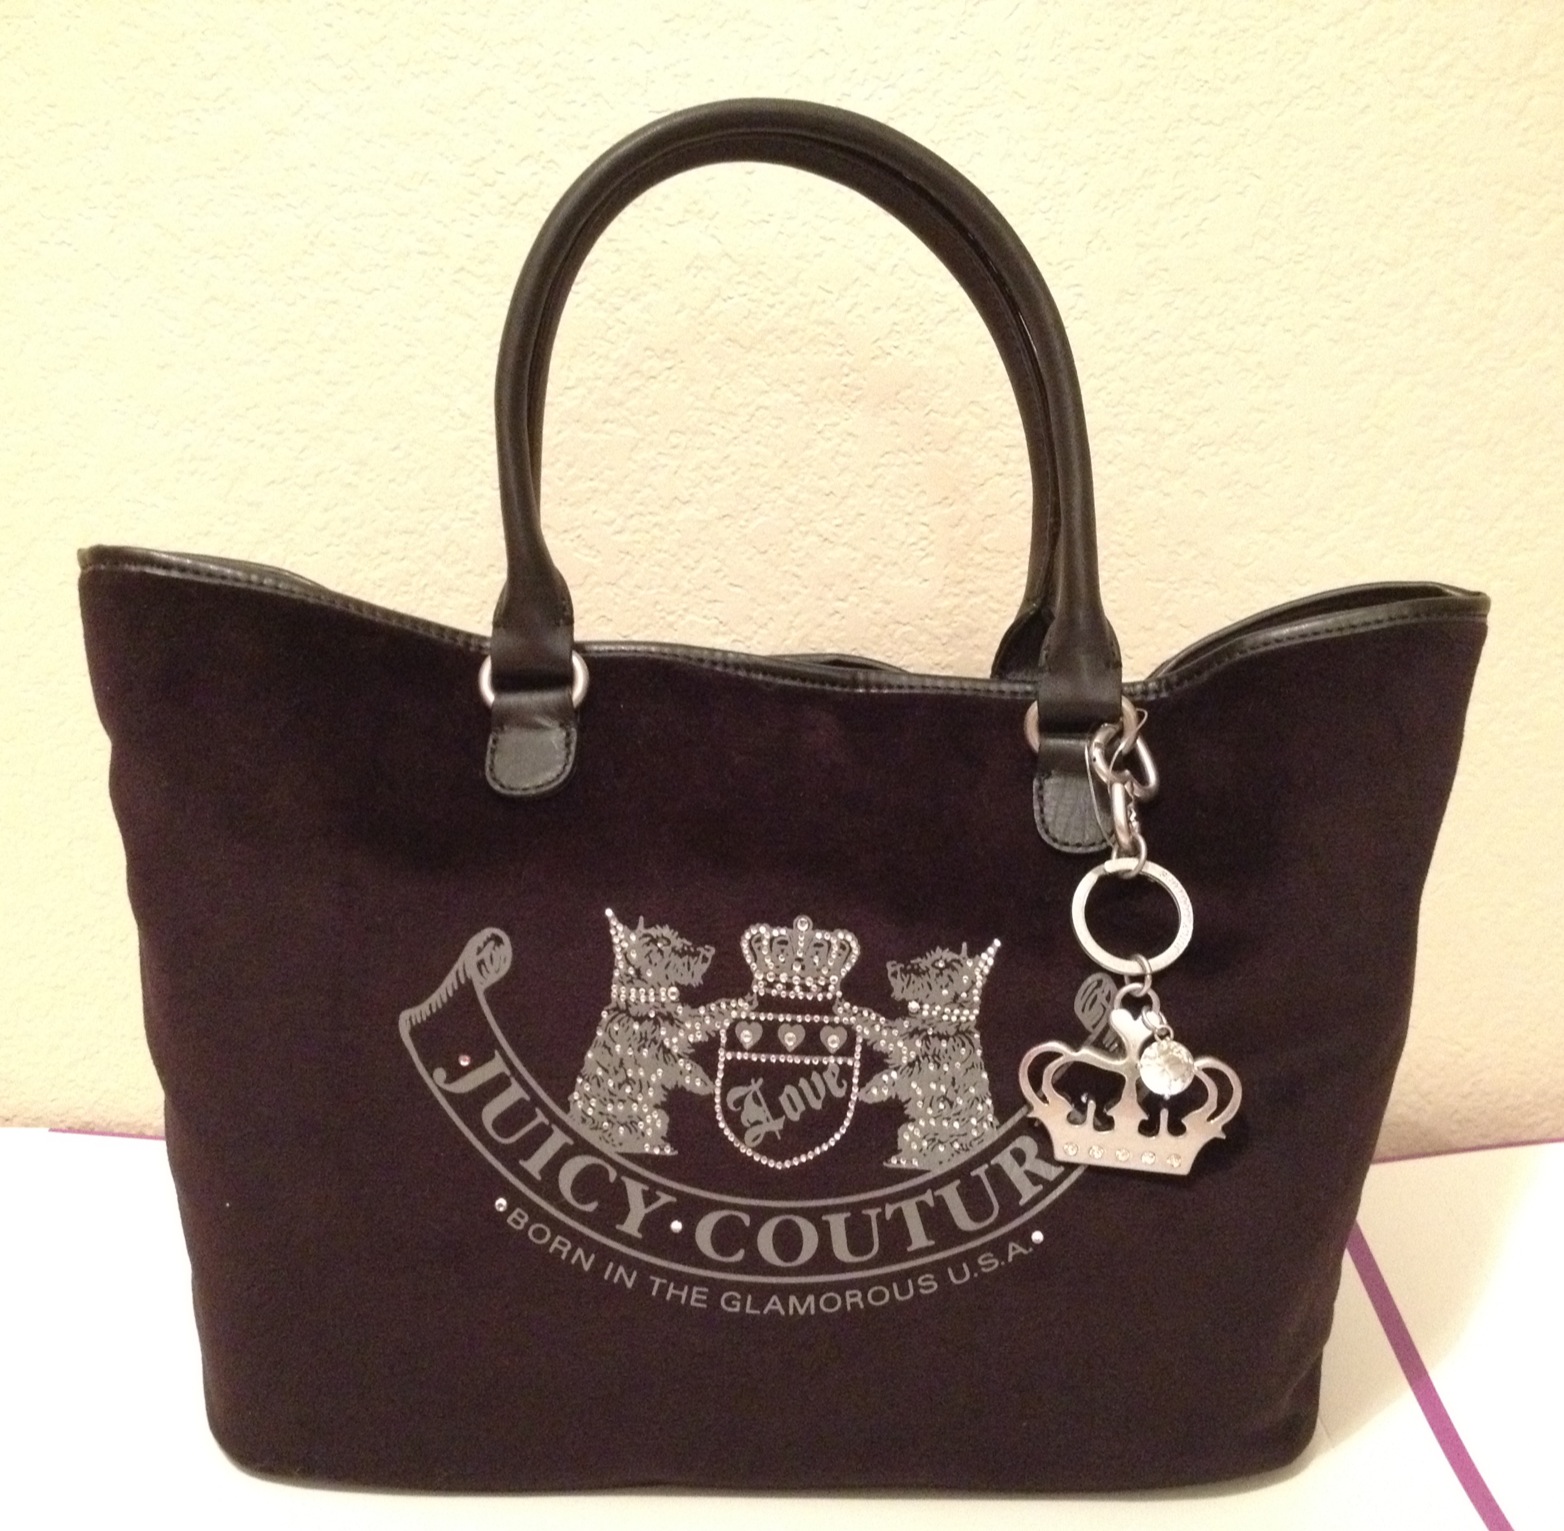 Branded Deals JUICY COUTURE Pammy Velour Tote Bag YHRUO537